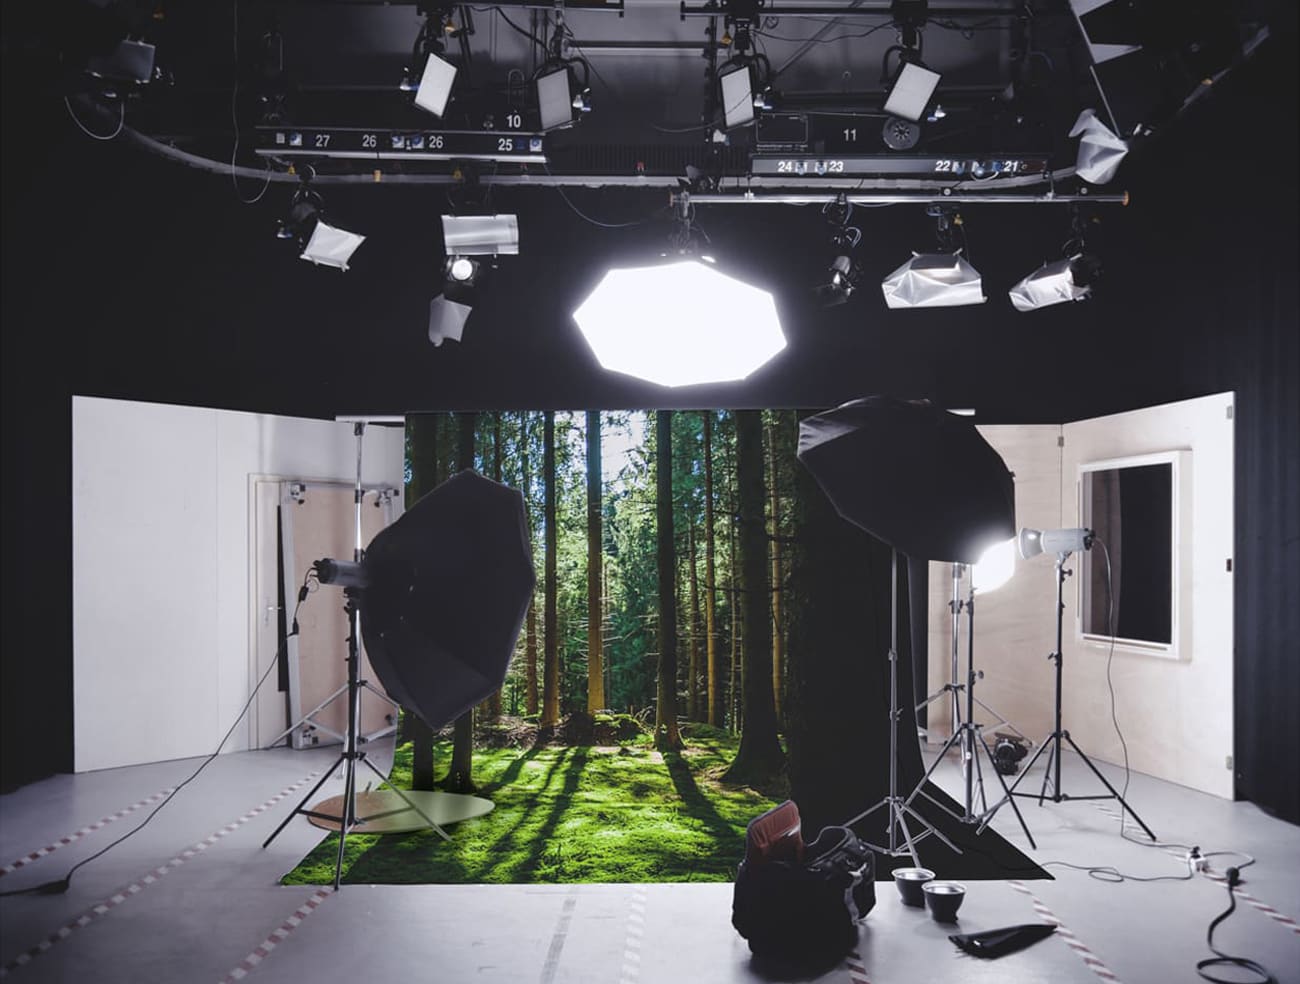 Top 10 Uses of Wallpaper Printing in Film/TV Production and Set Design